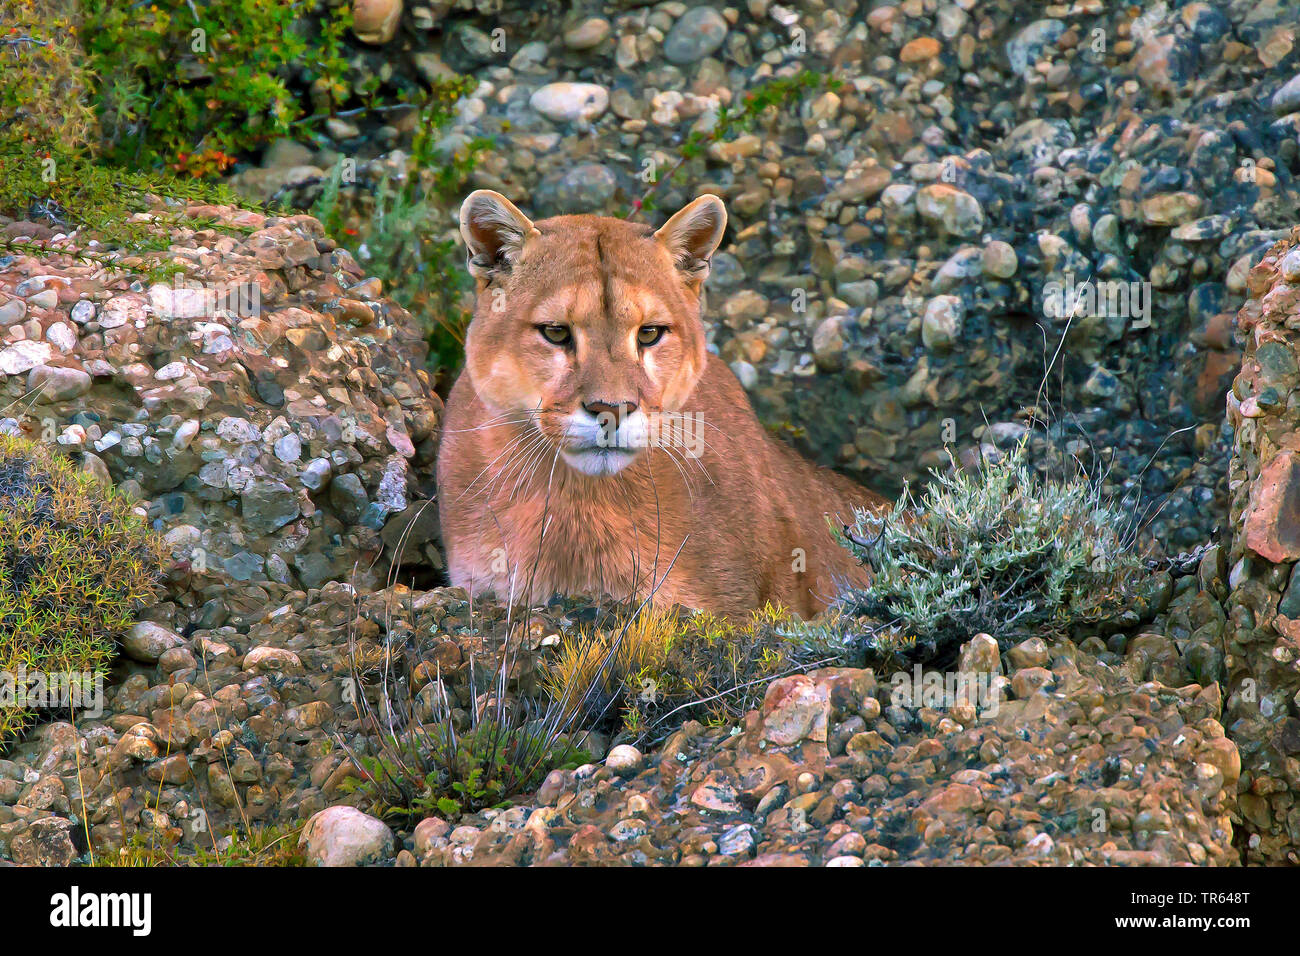 Southern South American cougar , Puma, Mountain lion, Cougar (Puma concolor  puma, Puma concolor patagonica, Puma patagonica, Puma concolor, Profelis  concolor, Felis concolor, Felis concolor patagonica), lurking, Chile,  Torres del Paine National